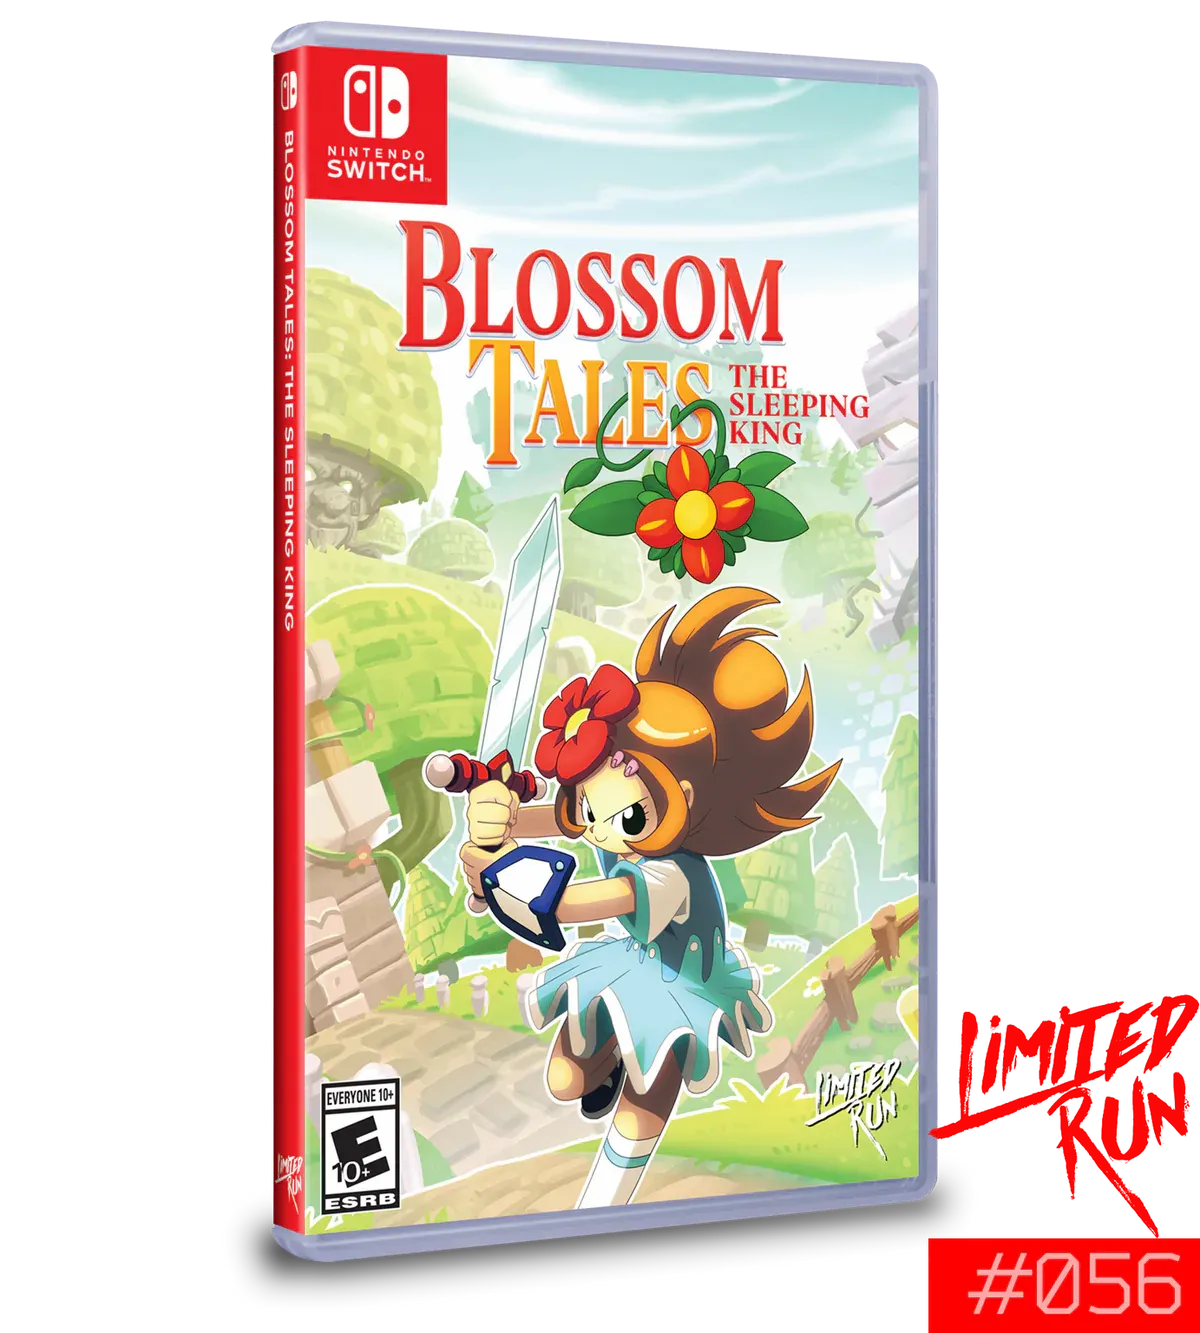 Blossom Tales: The Sleeping King Video Game